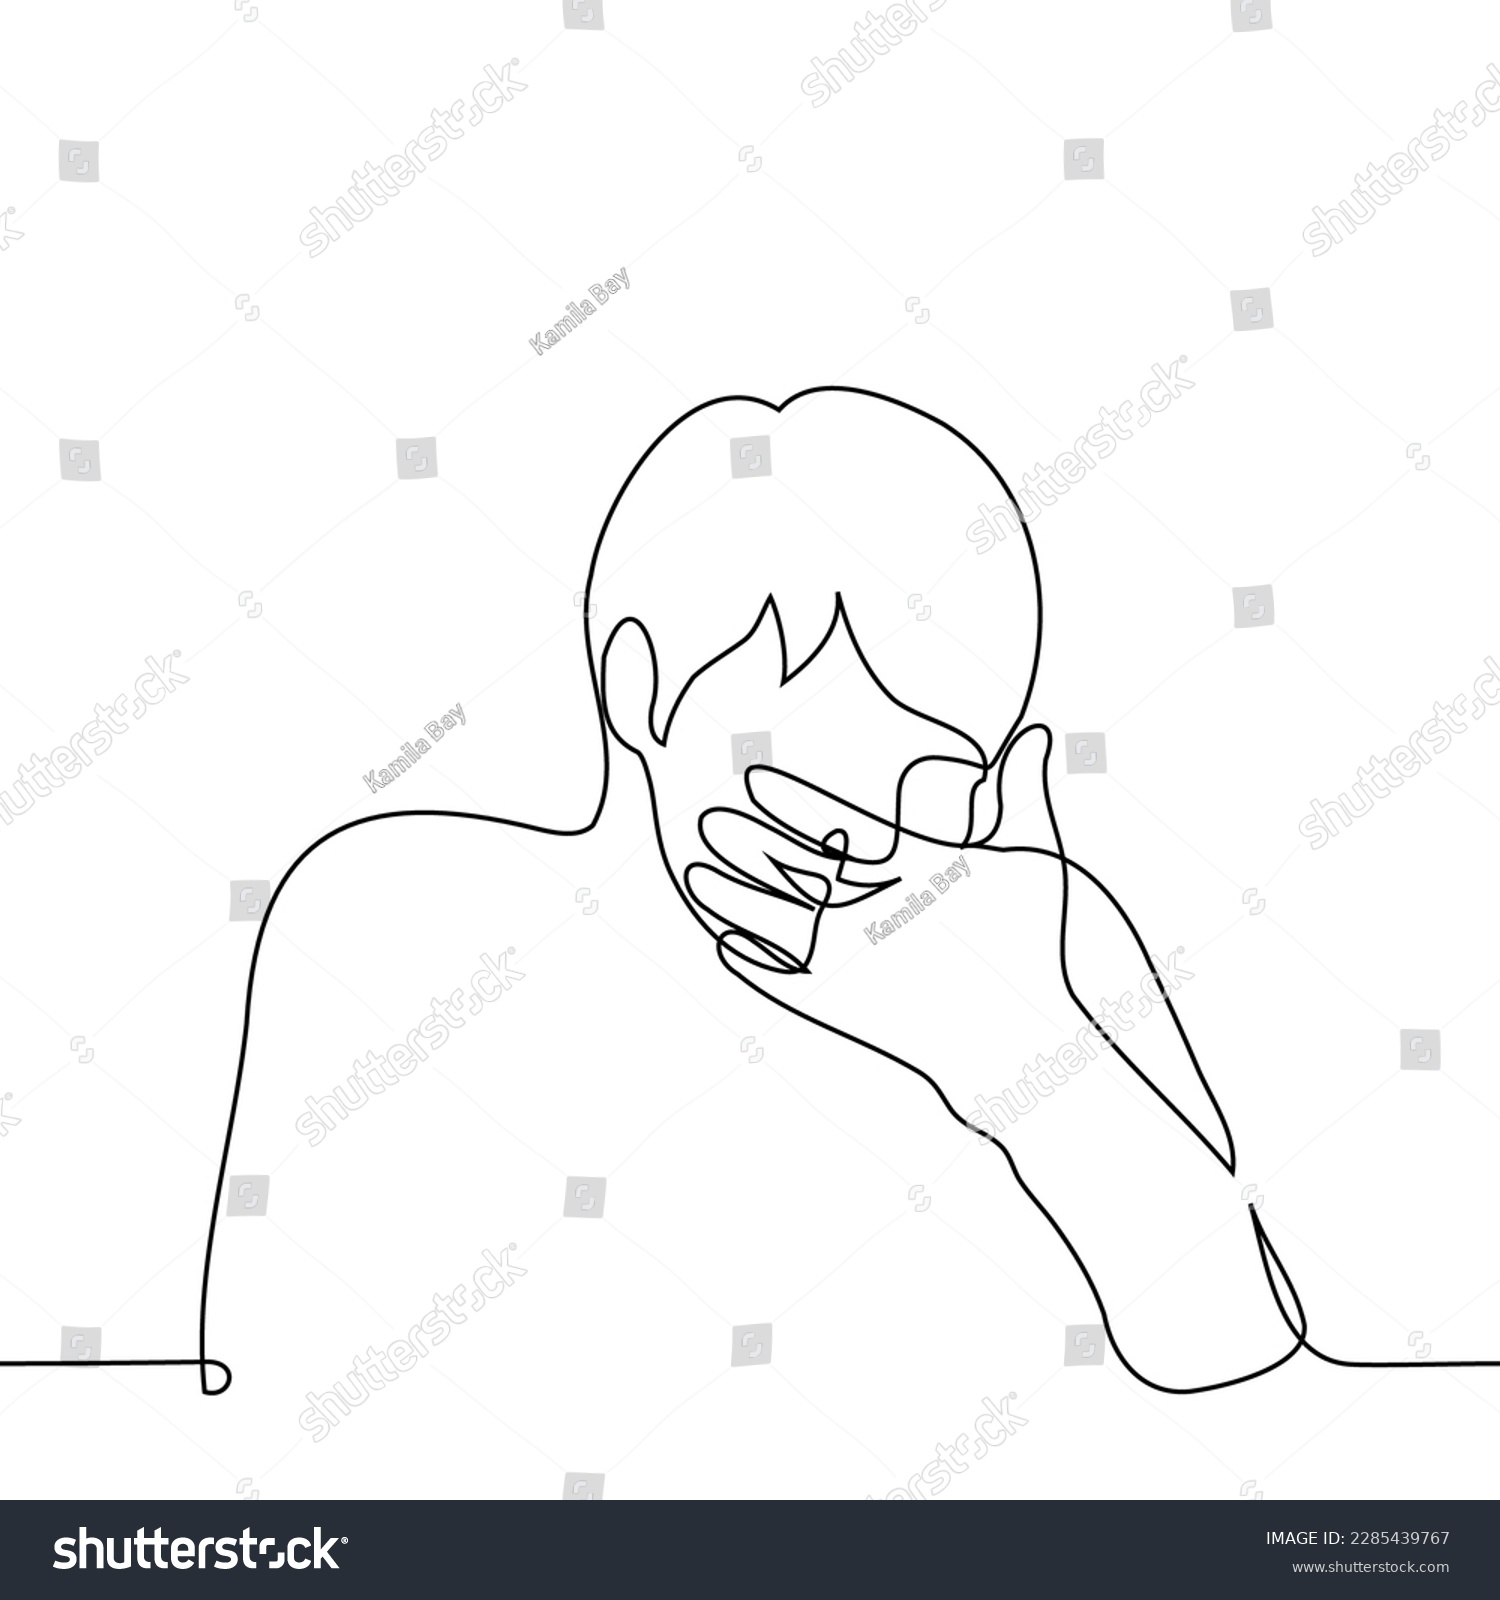 SVG of man laughing covering his mouth with his hand - one line drawing vector. concept inappropriate laughter, giggling svg